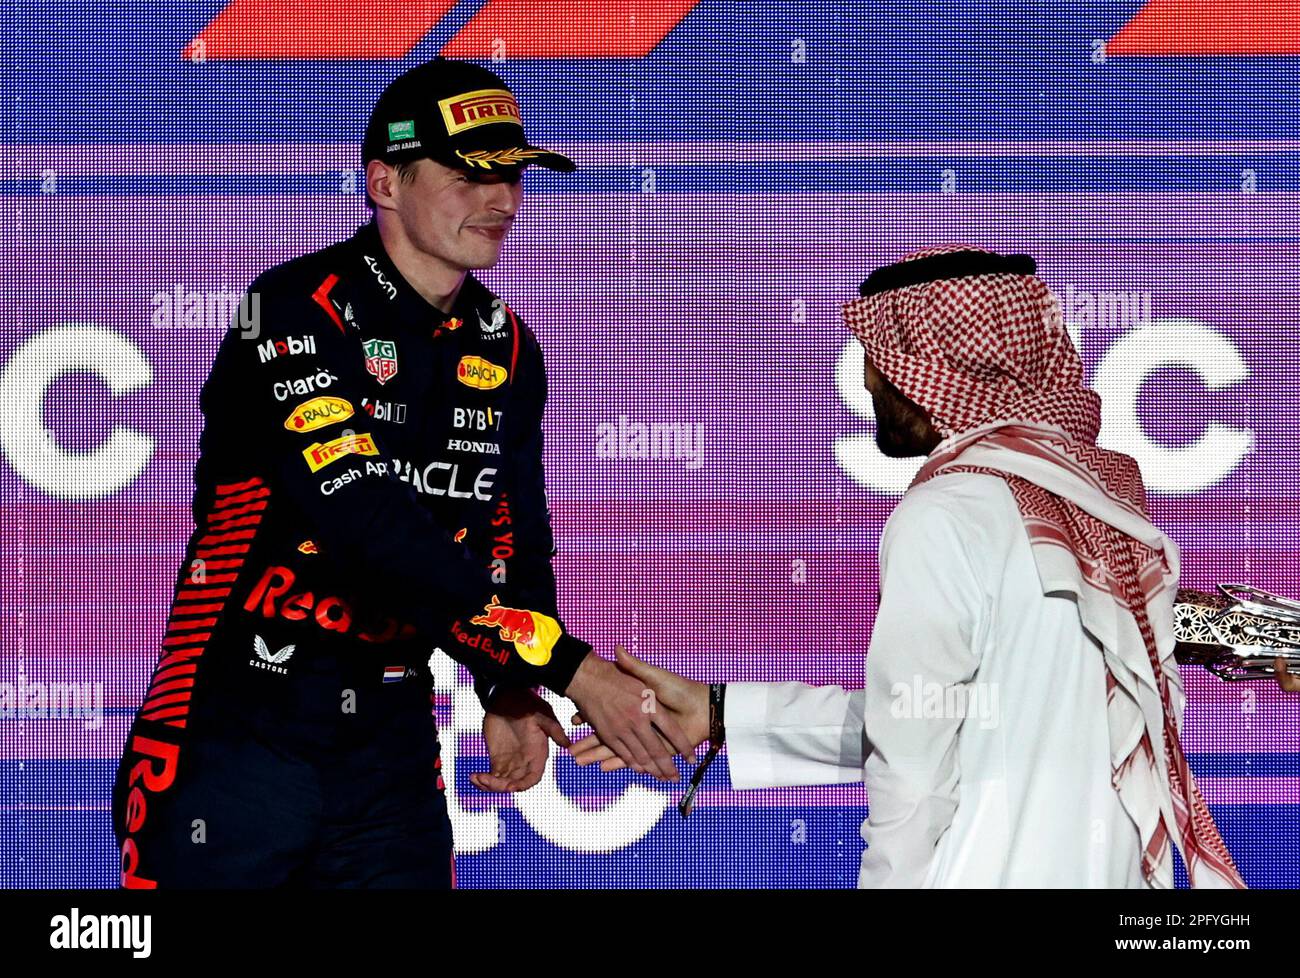 Formula One F1 - Saudi Arabian Grand Prix - Jeddah Corniche Circuit, Jeddah, Saudi Arabia - March 19, 2023 Saudi sports minister Prince Abdul Aziz bin Turki Al-Faisal shakes hands with second placed Red Bull's Max Verstappen on the podium after presenting a trophy to winner Red Bull's Sergio Perez REUTERS/Hamad I Mohammed Stock Photo